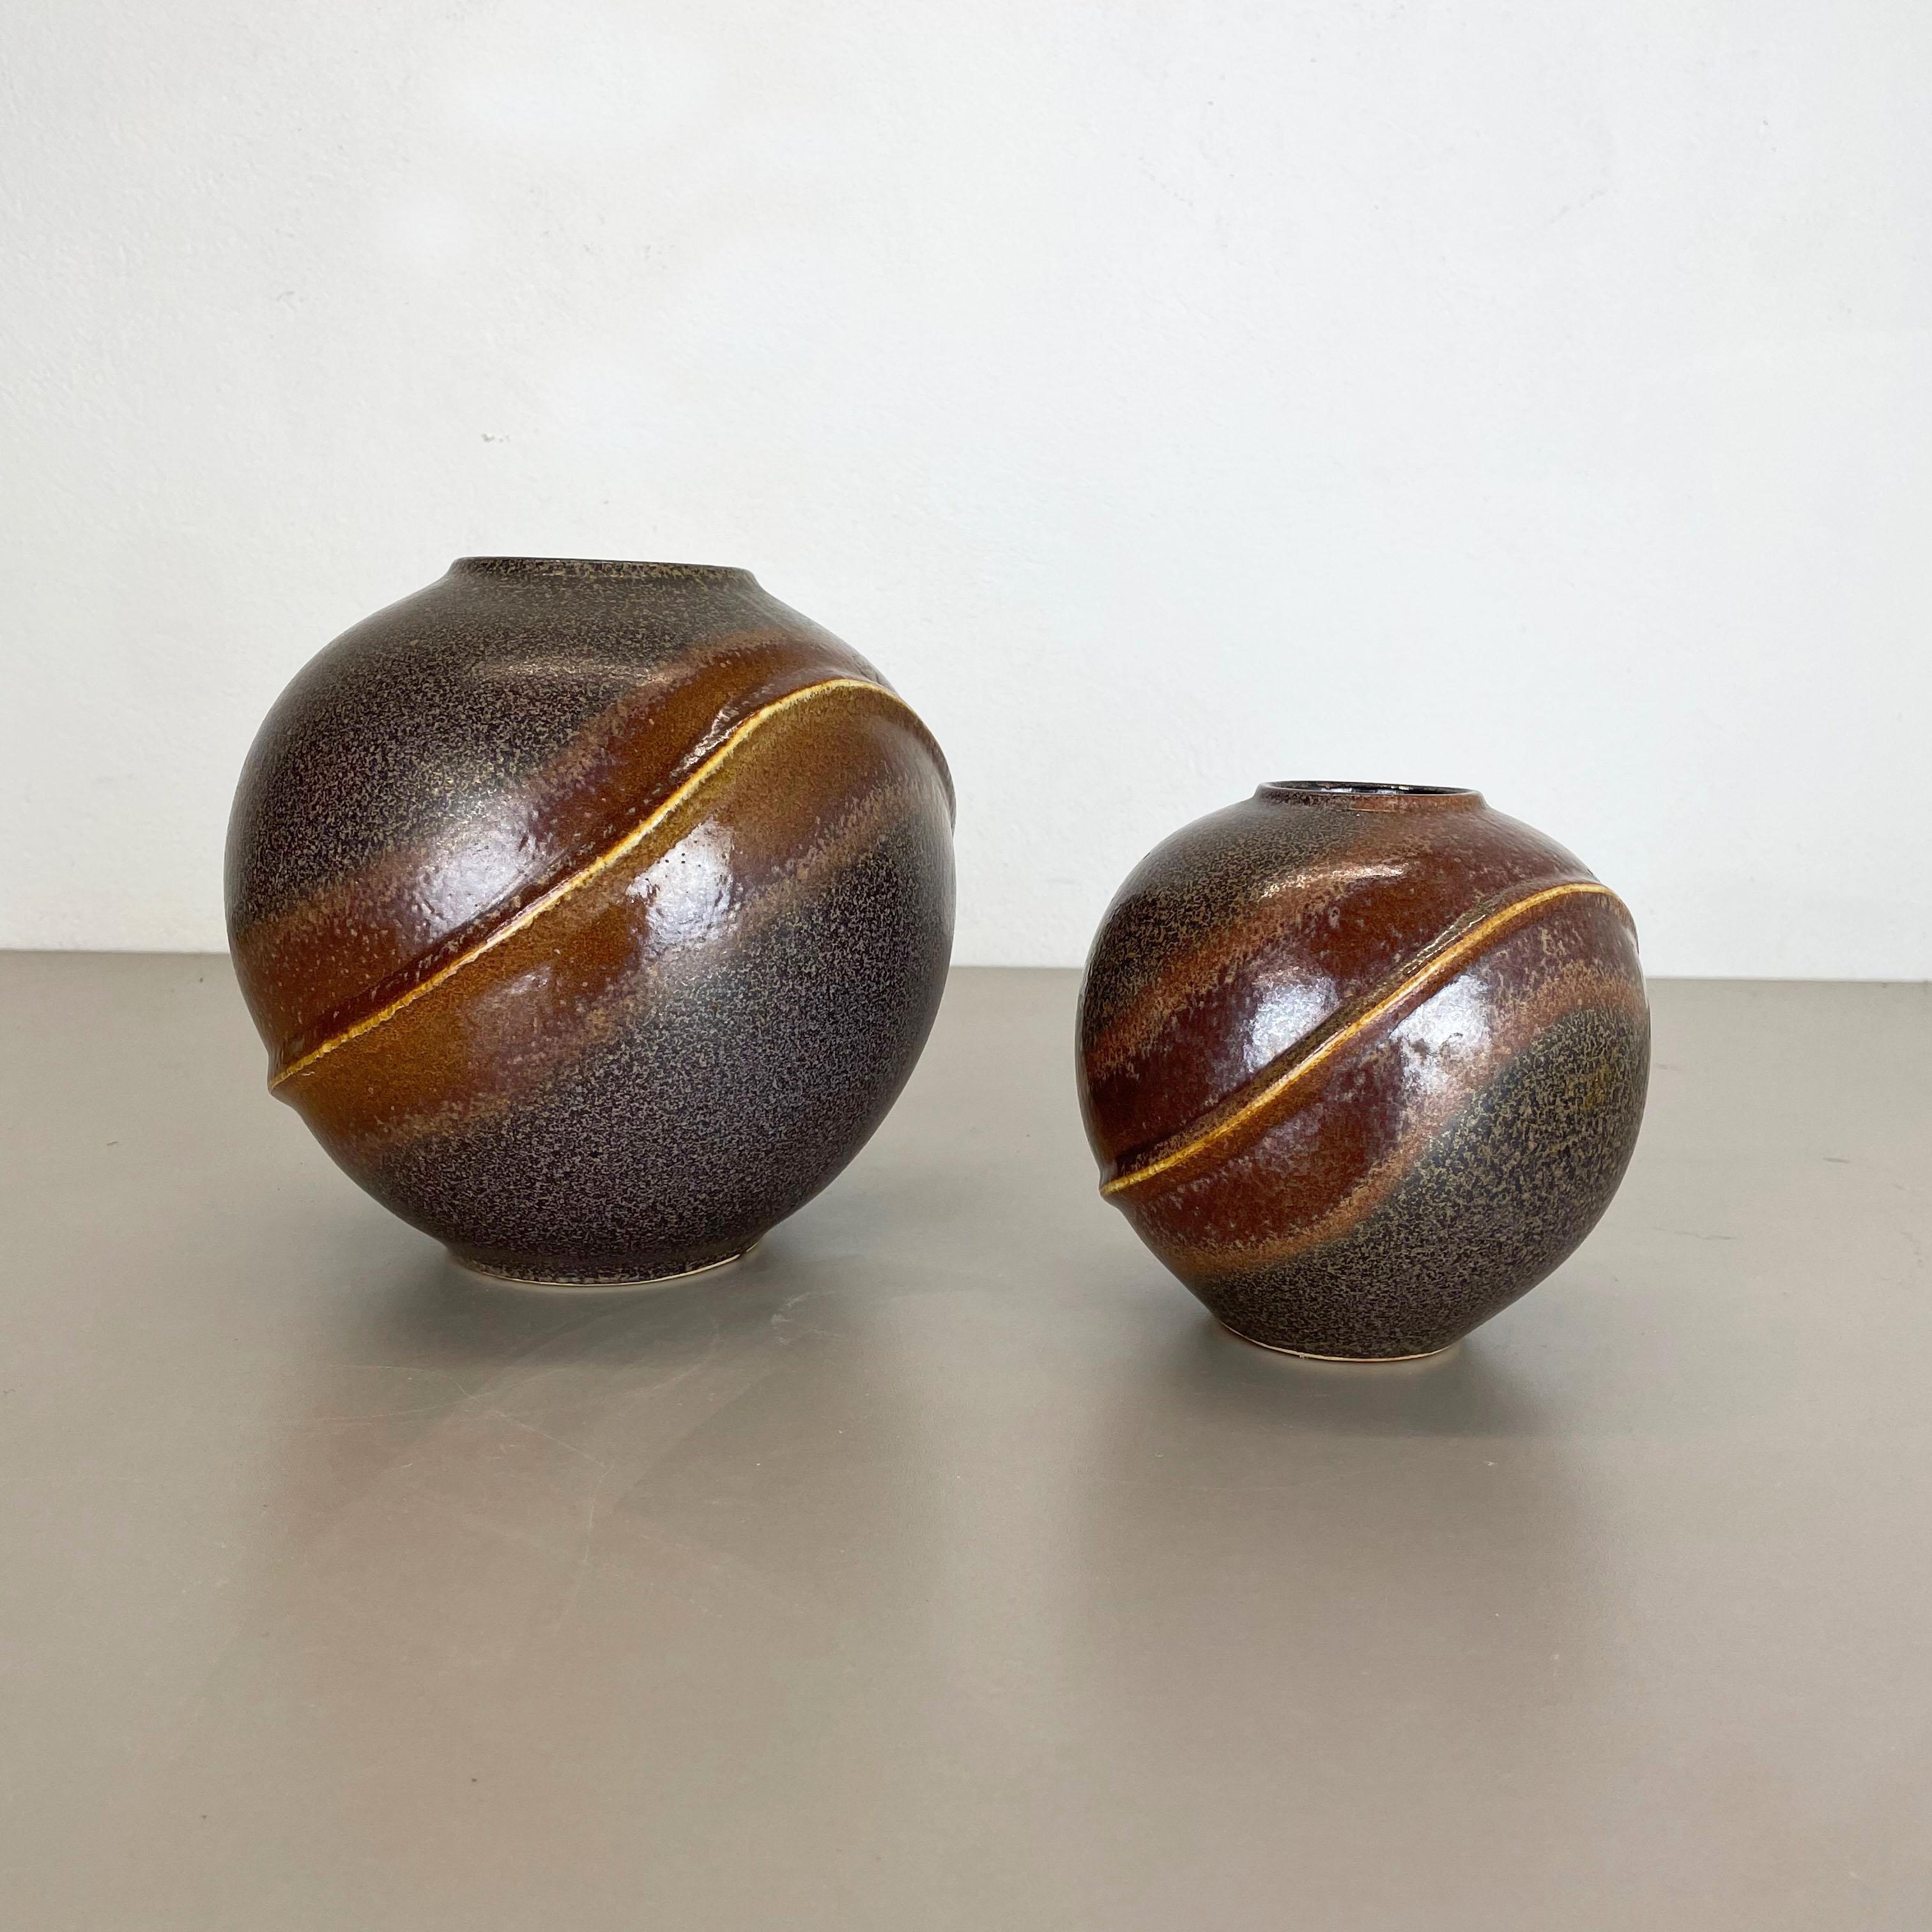 Article:

Pottery ceramic vase set of 2


Producer:

Dümler and Breiden, Germany


Decade:

1970s



Description:

Original vintage 1970s pottery stoneware ceramic vases in Germany. High quality German production with a nice